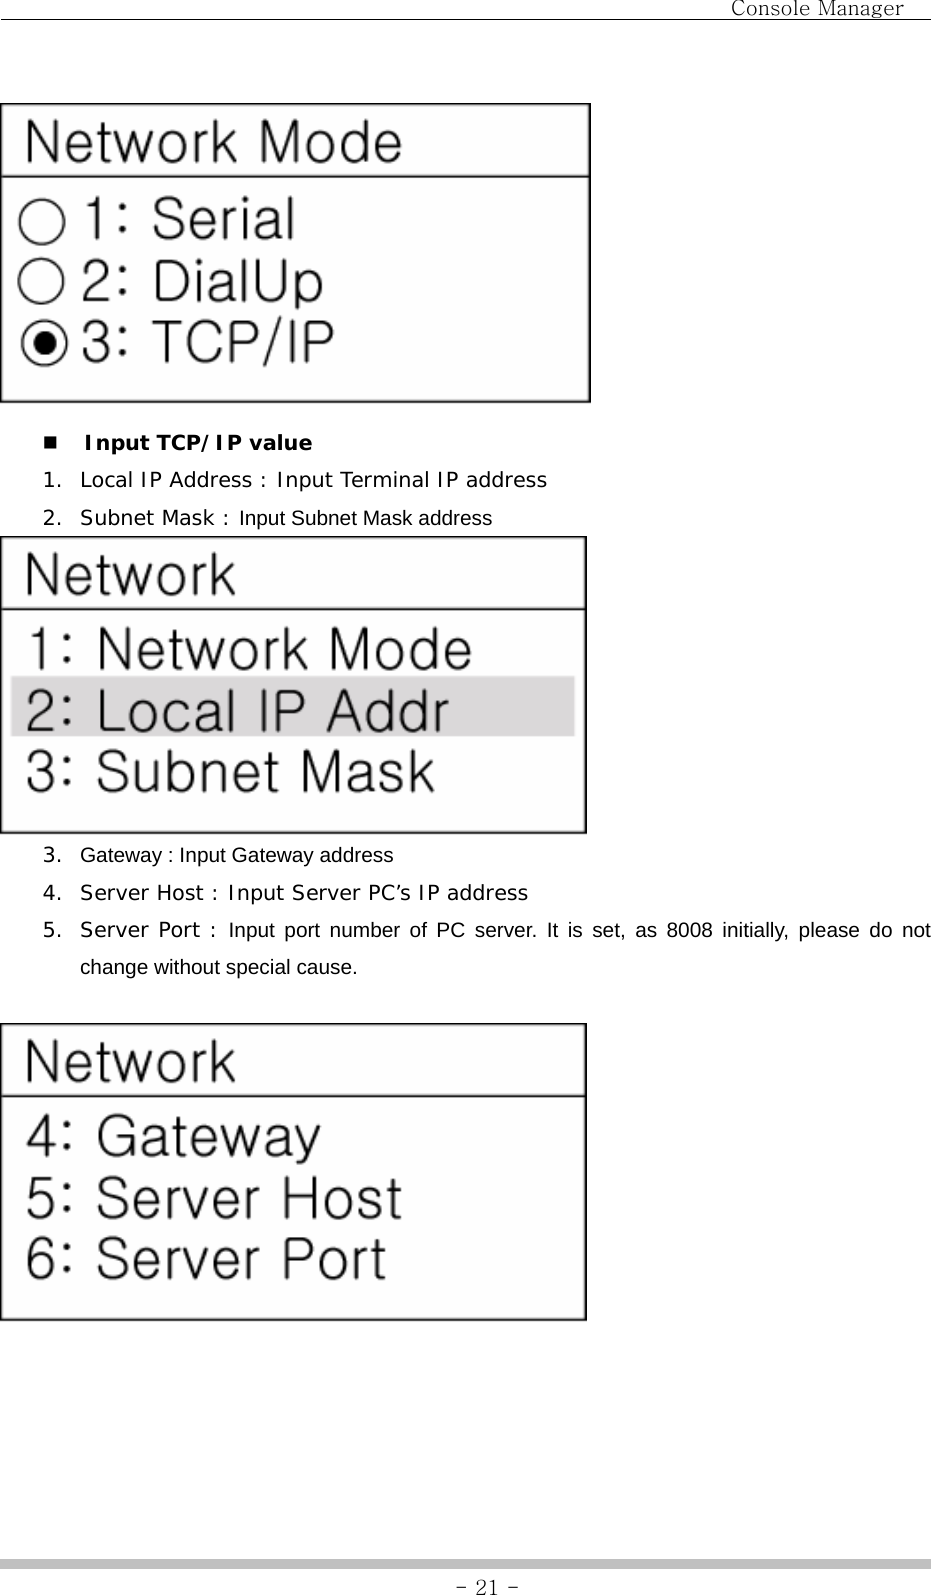                                Console Manager               - 21 -  Input TCP/IP value  1. Local IP Address : Input Terminal IP address 2. Subnet Mask : Input Subnet Mask address  3.  Gateway : Input Gateway address 4. Server Host : Input Server PC’s IP address 5. Server Port : Input port number of PC server. It is set, as 8008 initially, please do not change without special cause.      